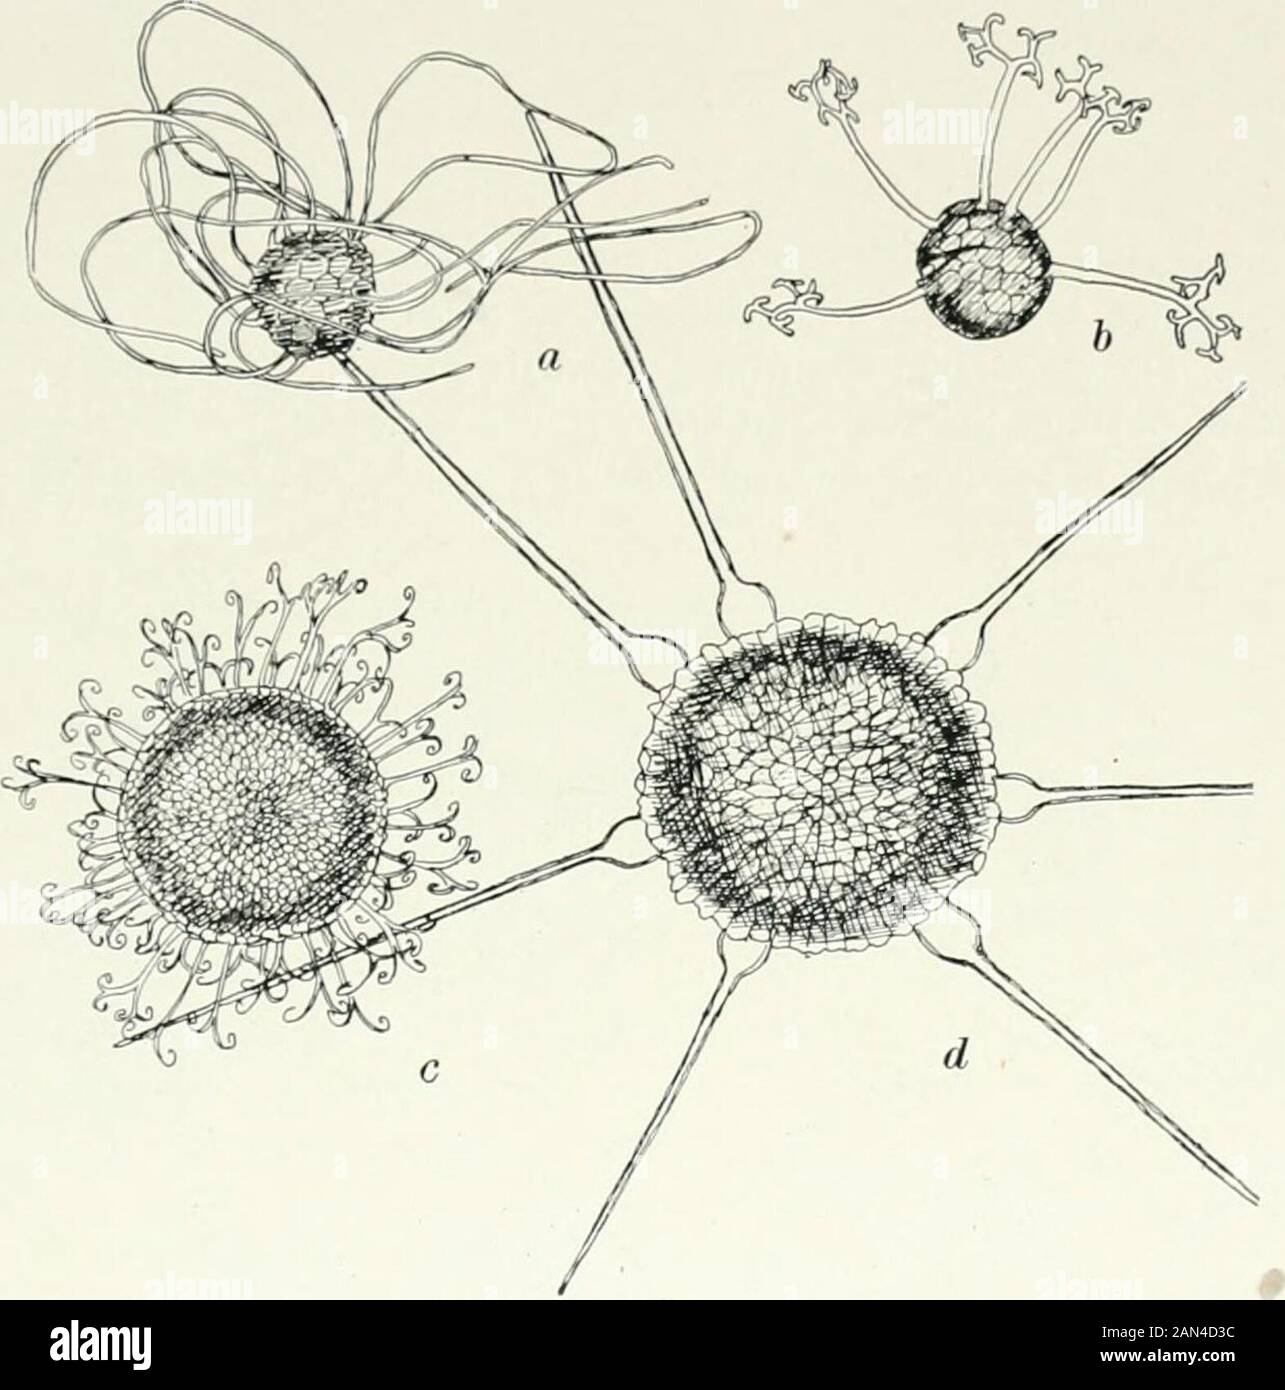 Fungi, Ascomycetes, Ustilaginales, Uredinales . s genusalso the apex of the perithecium is furnished with a ring of richly branchedpenicillate cells. At about the time of spore-formation these break down,forming a sticky gelatinous cap, by means of which the perithecium, afterit is first set free, adheres upside down to its original host plant or to otherobjects. In view of this peculiarity the ascription of Phyllactinia to anyhost in contact with which its perithecia may be found demands careful veri-fication. The function of the true appendages in the Erysiphaceae is somewhatvariable. In Phy Stock Photo